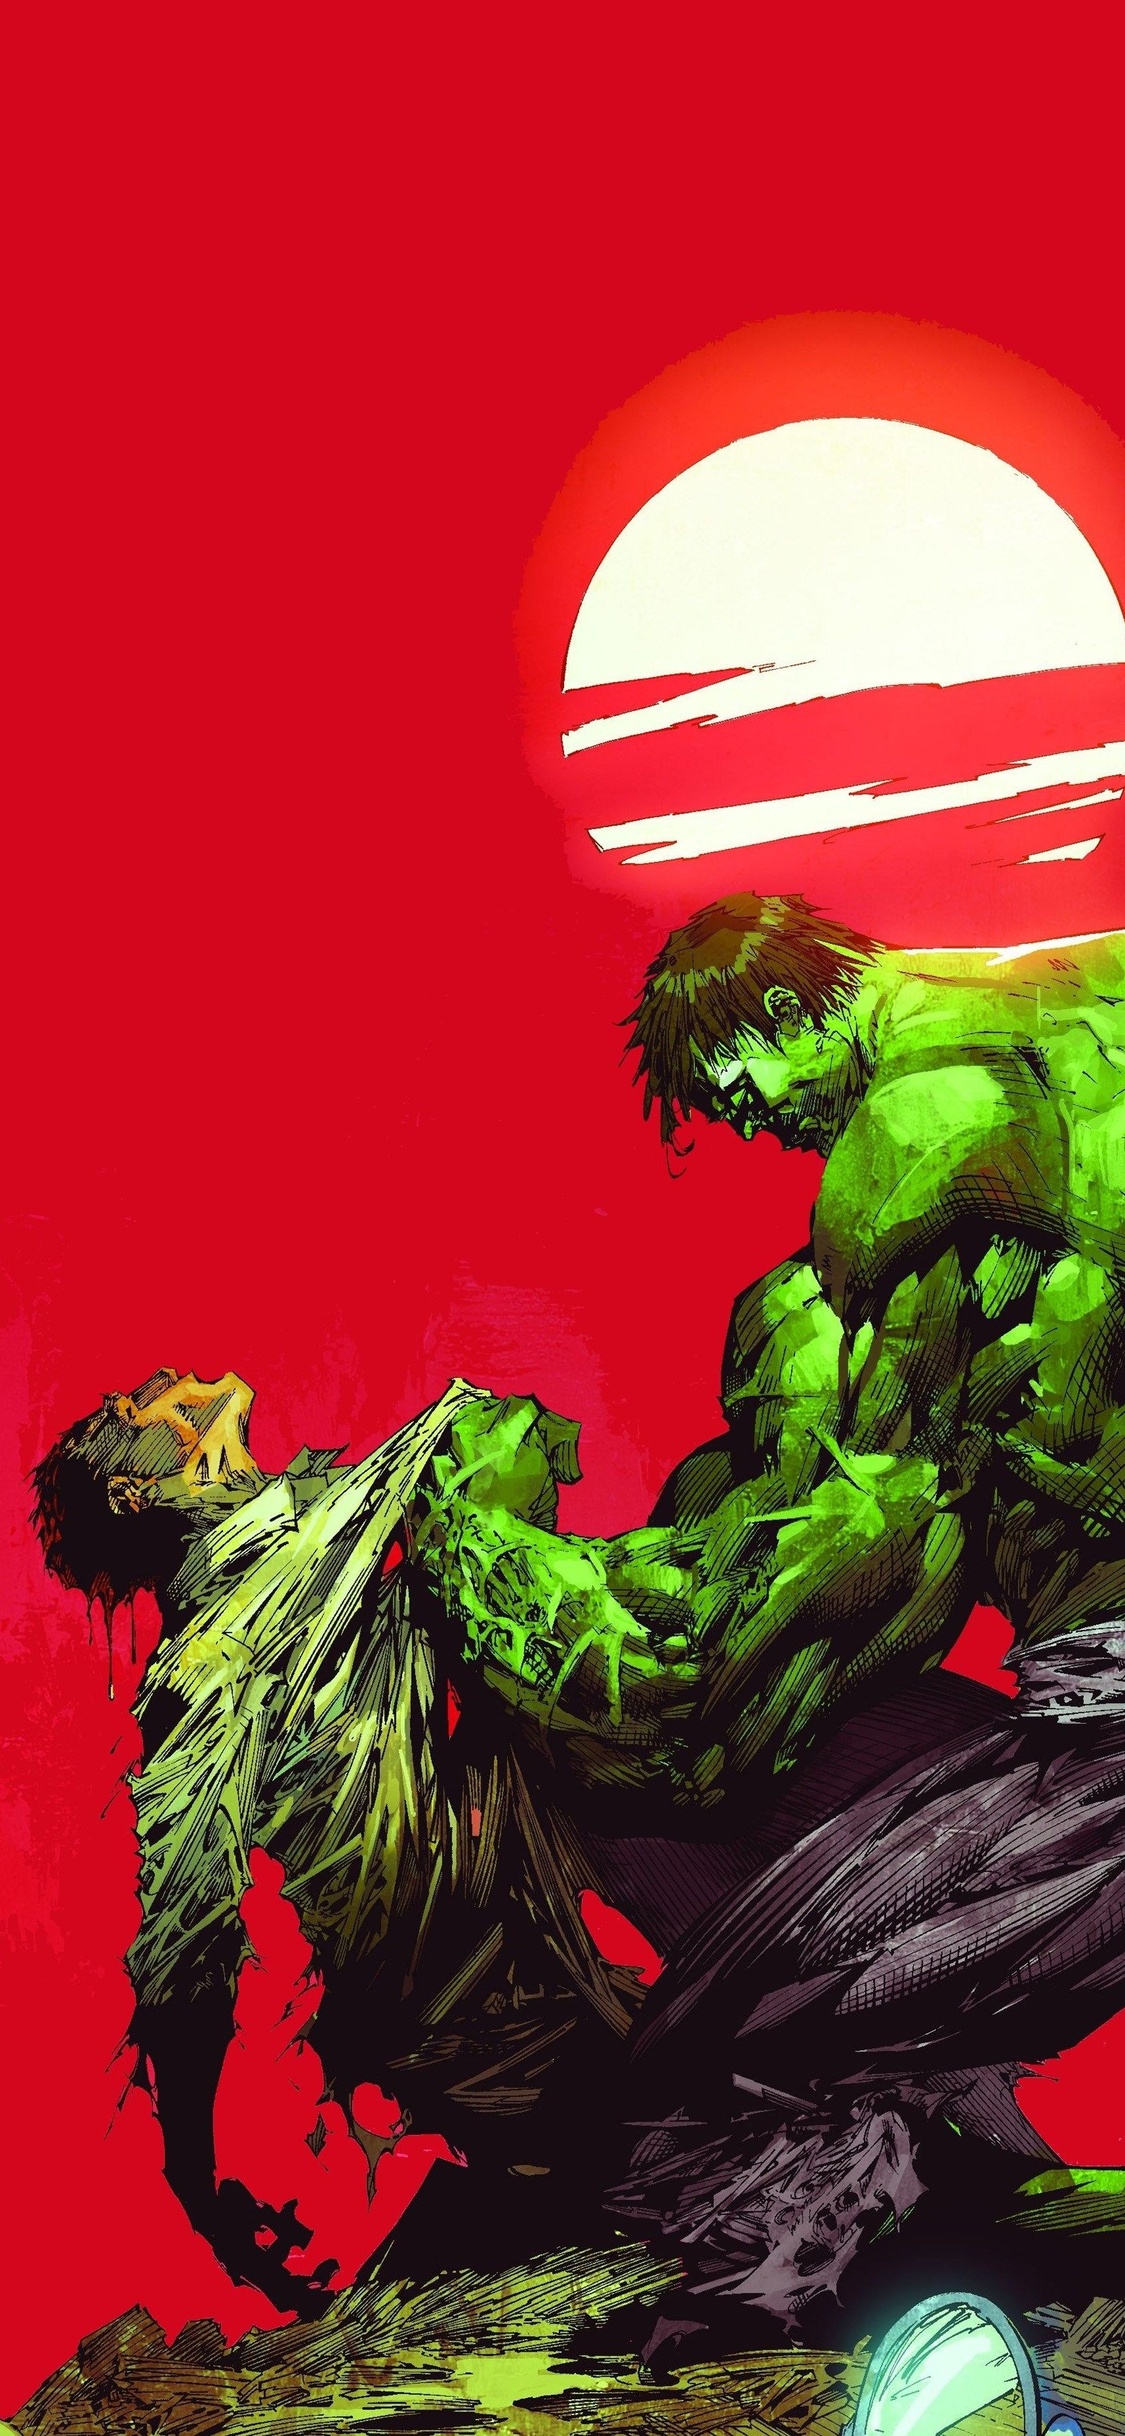 Bruce Banner Images Wallpapers